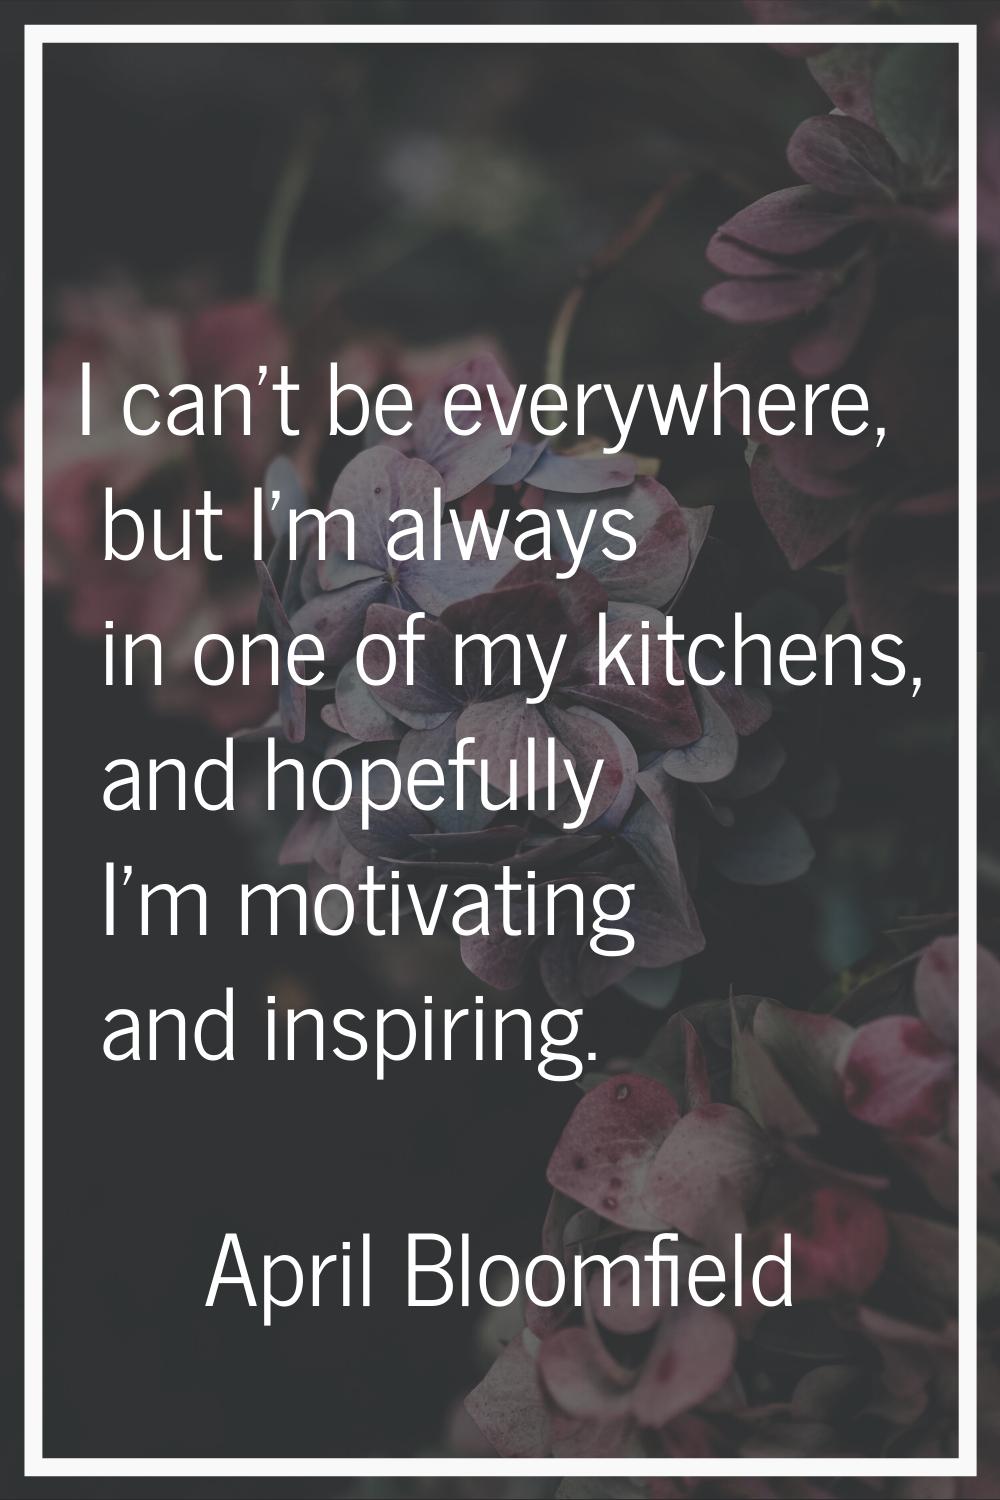 I can't be everywhere, but I'm always in one of my kitchens, and hopefully I'm motivating and inspi